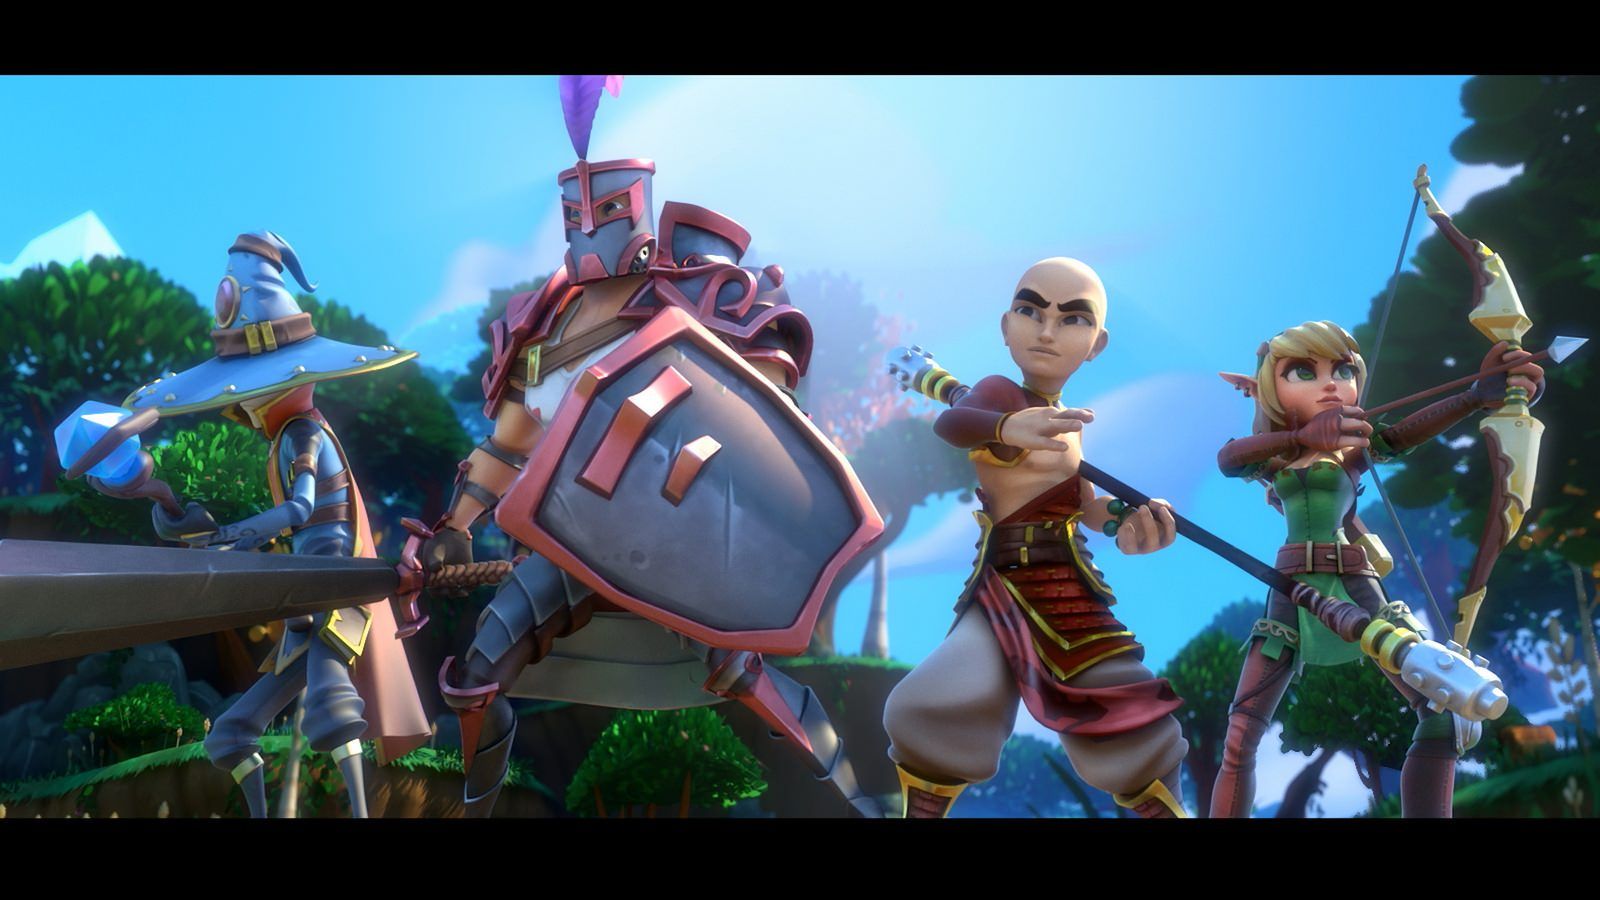 Dungeon Defenders II Coming to PS4 September 29th